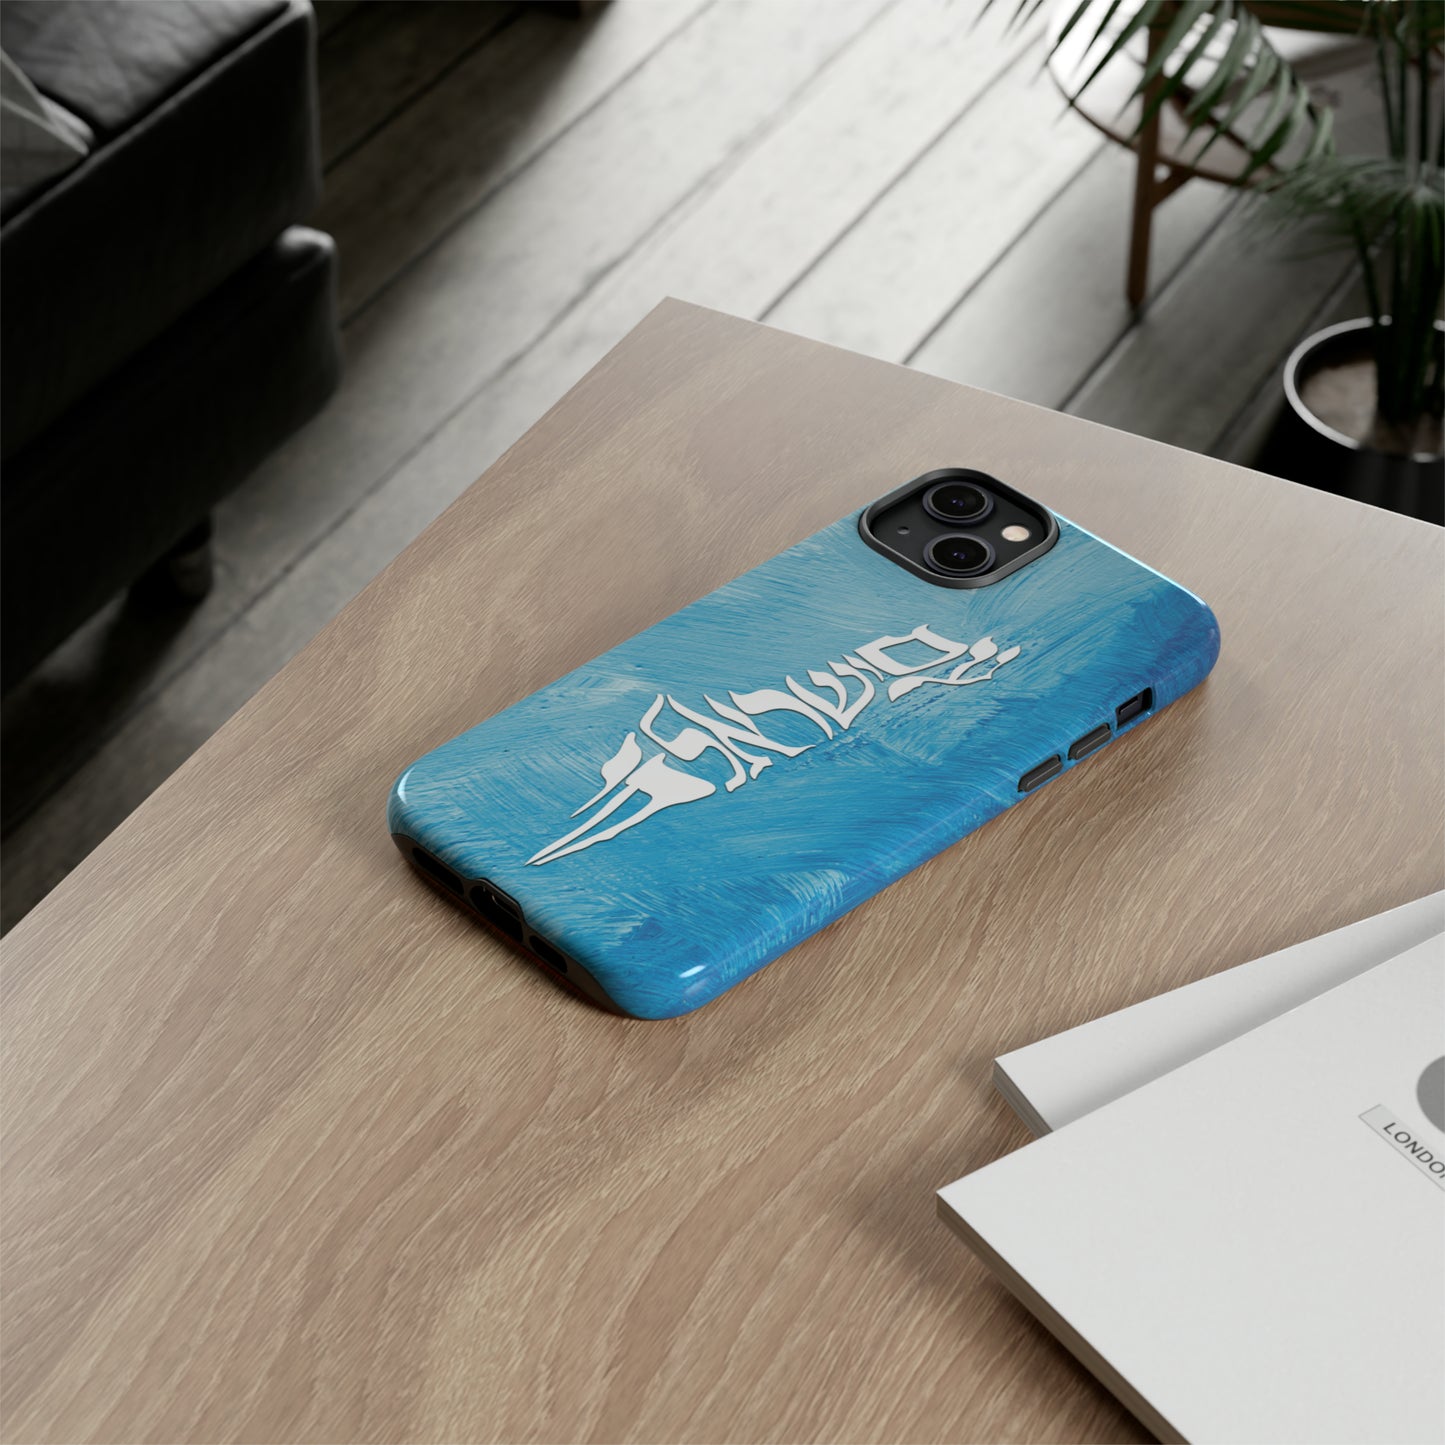 the MAP phone case